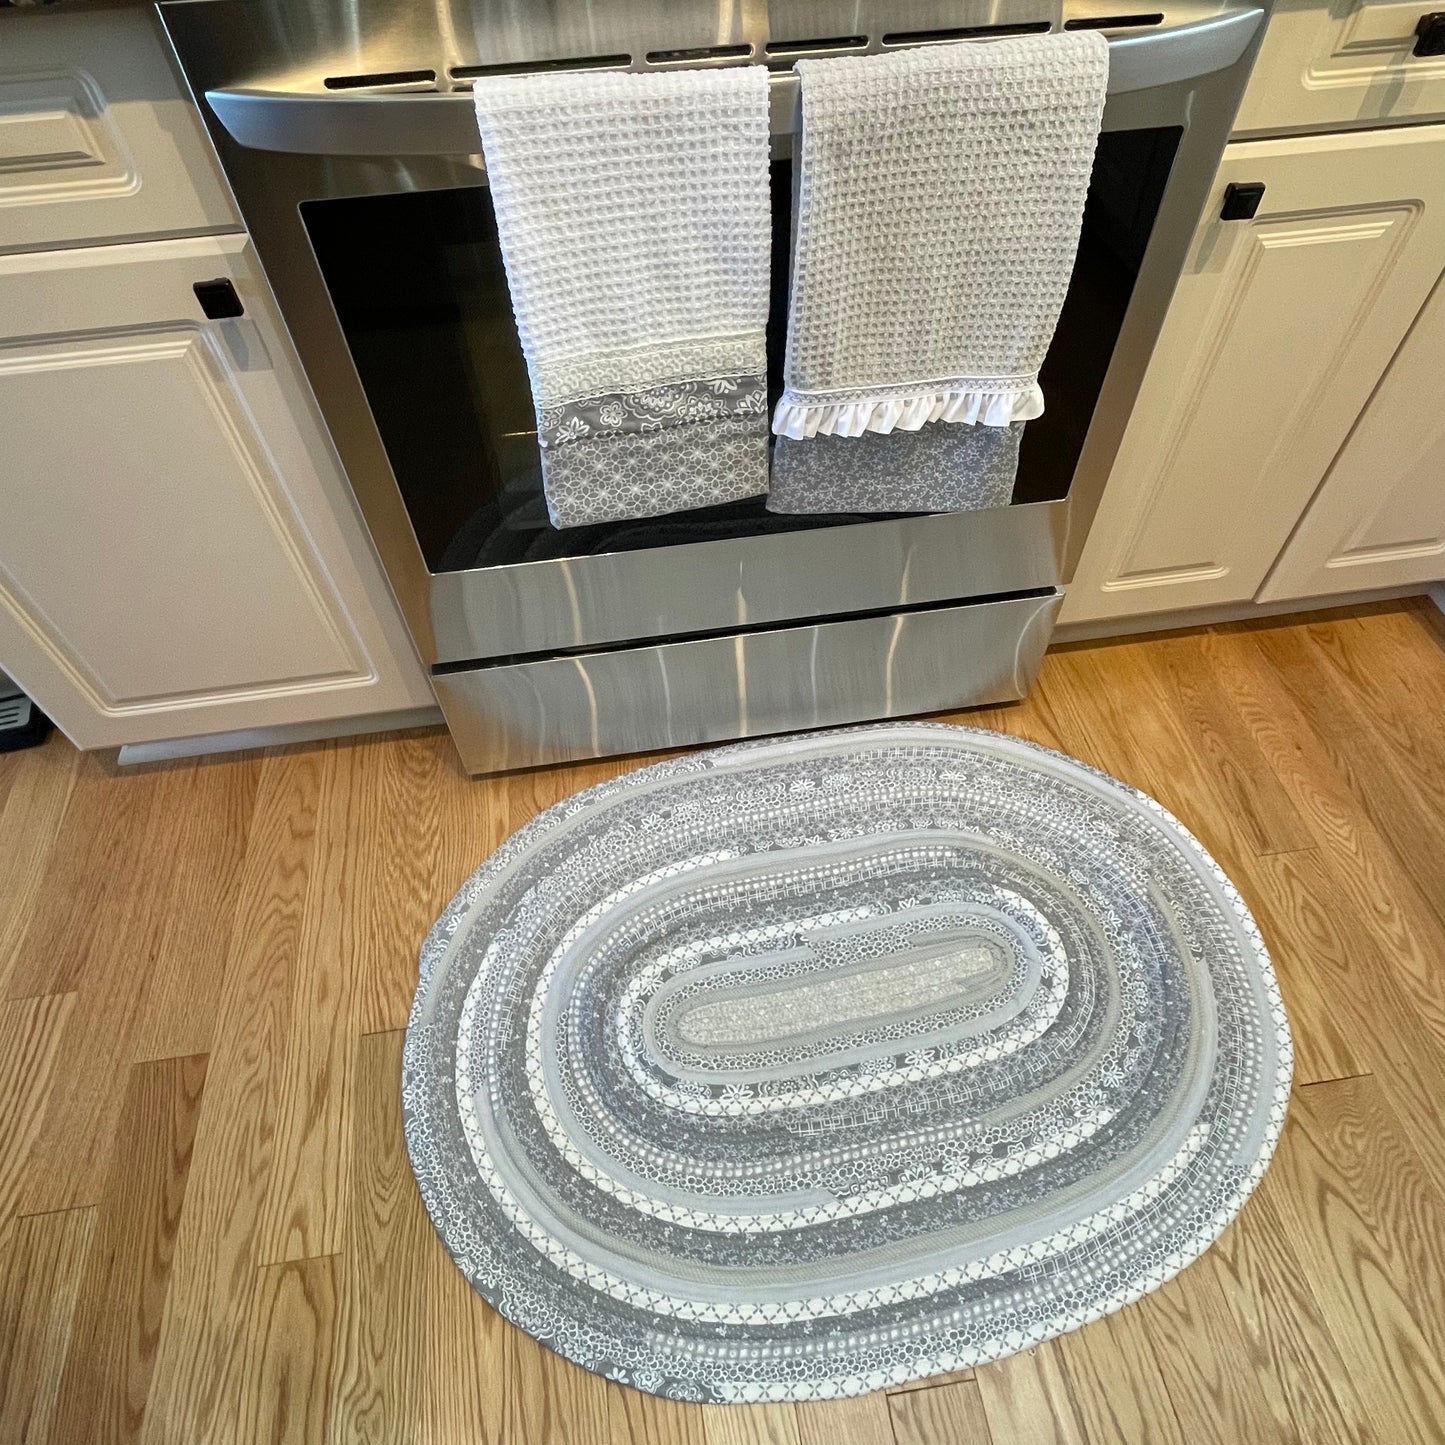 Grey & White Cotton Kitchen Sink Rug - One-of-a-Kind Handmade Farmhouse Style